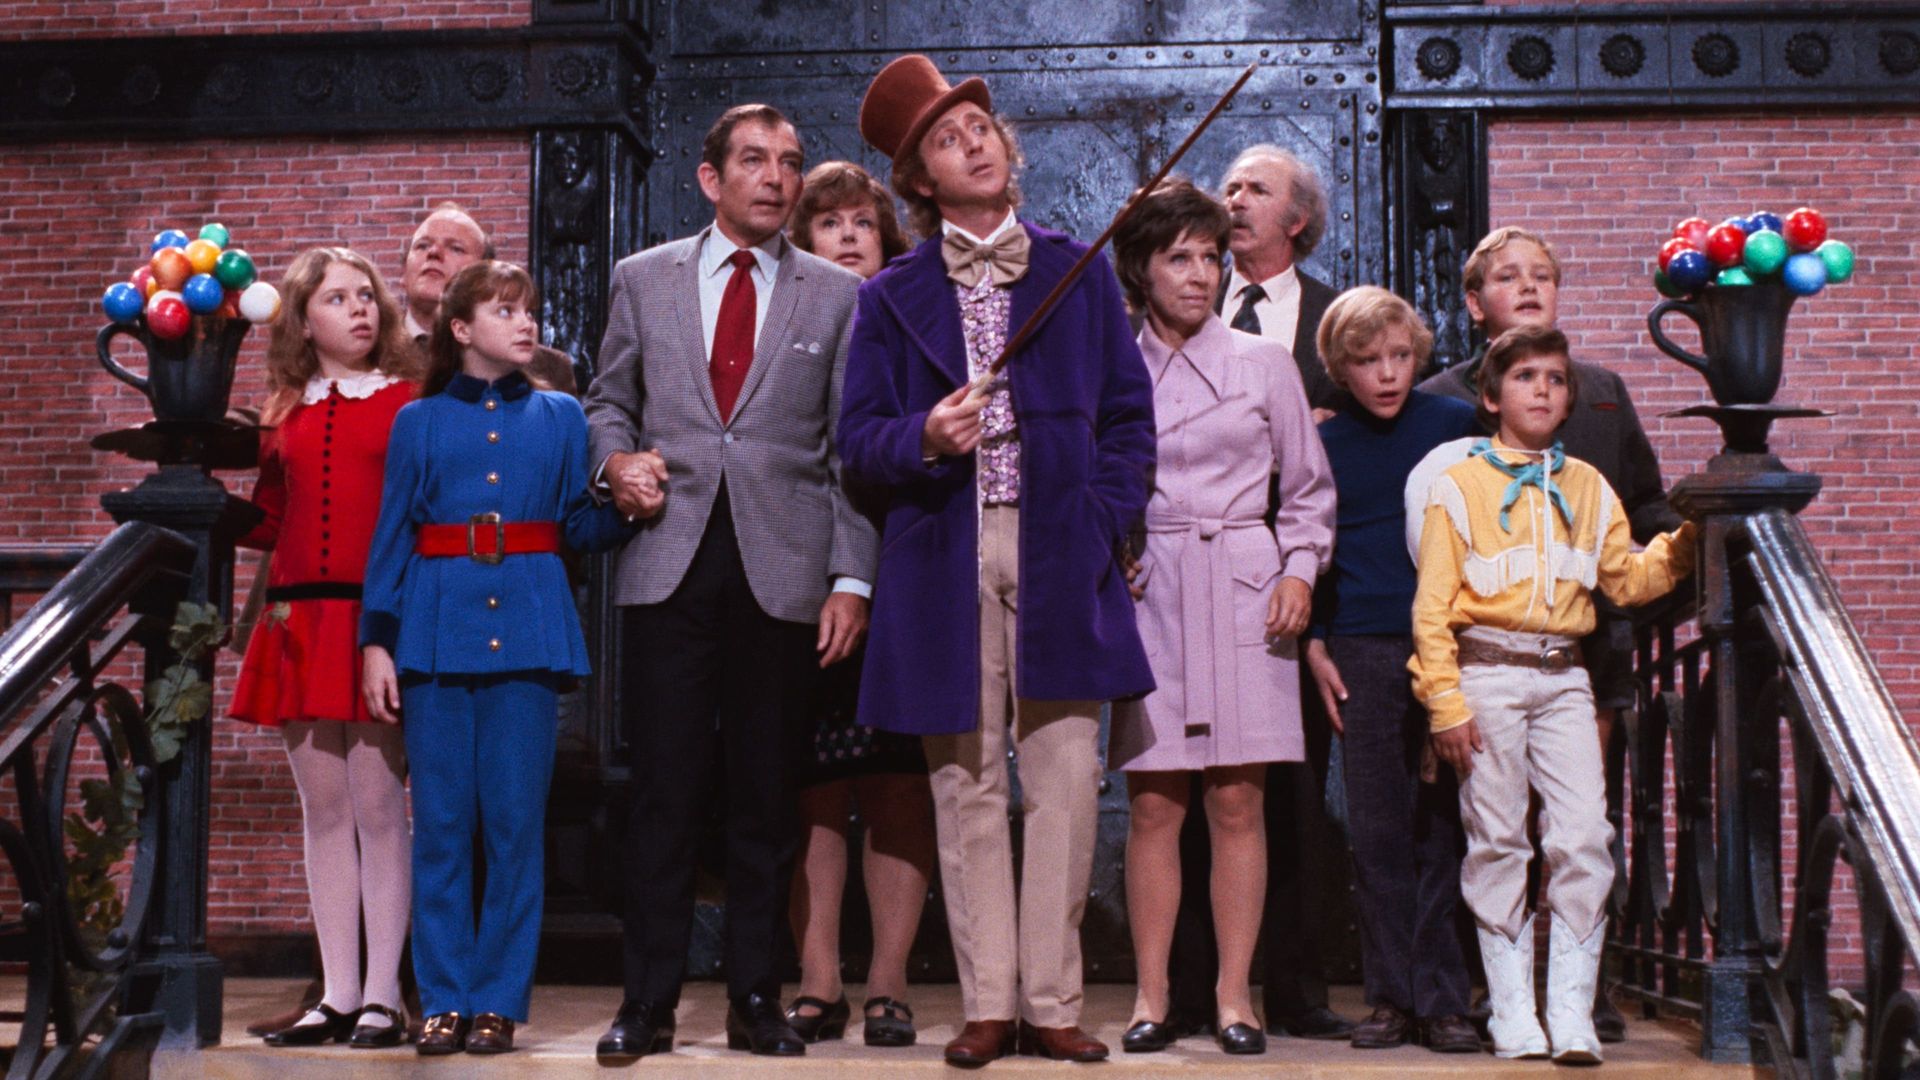 Willy Wonka & the Chocolate Factory Backdrop